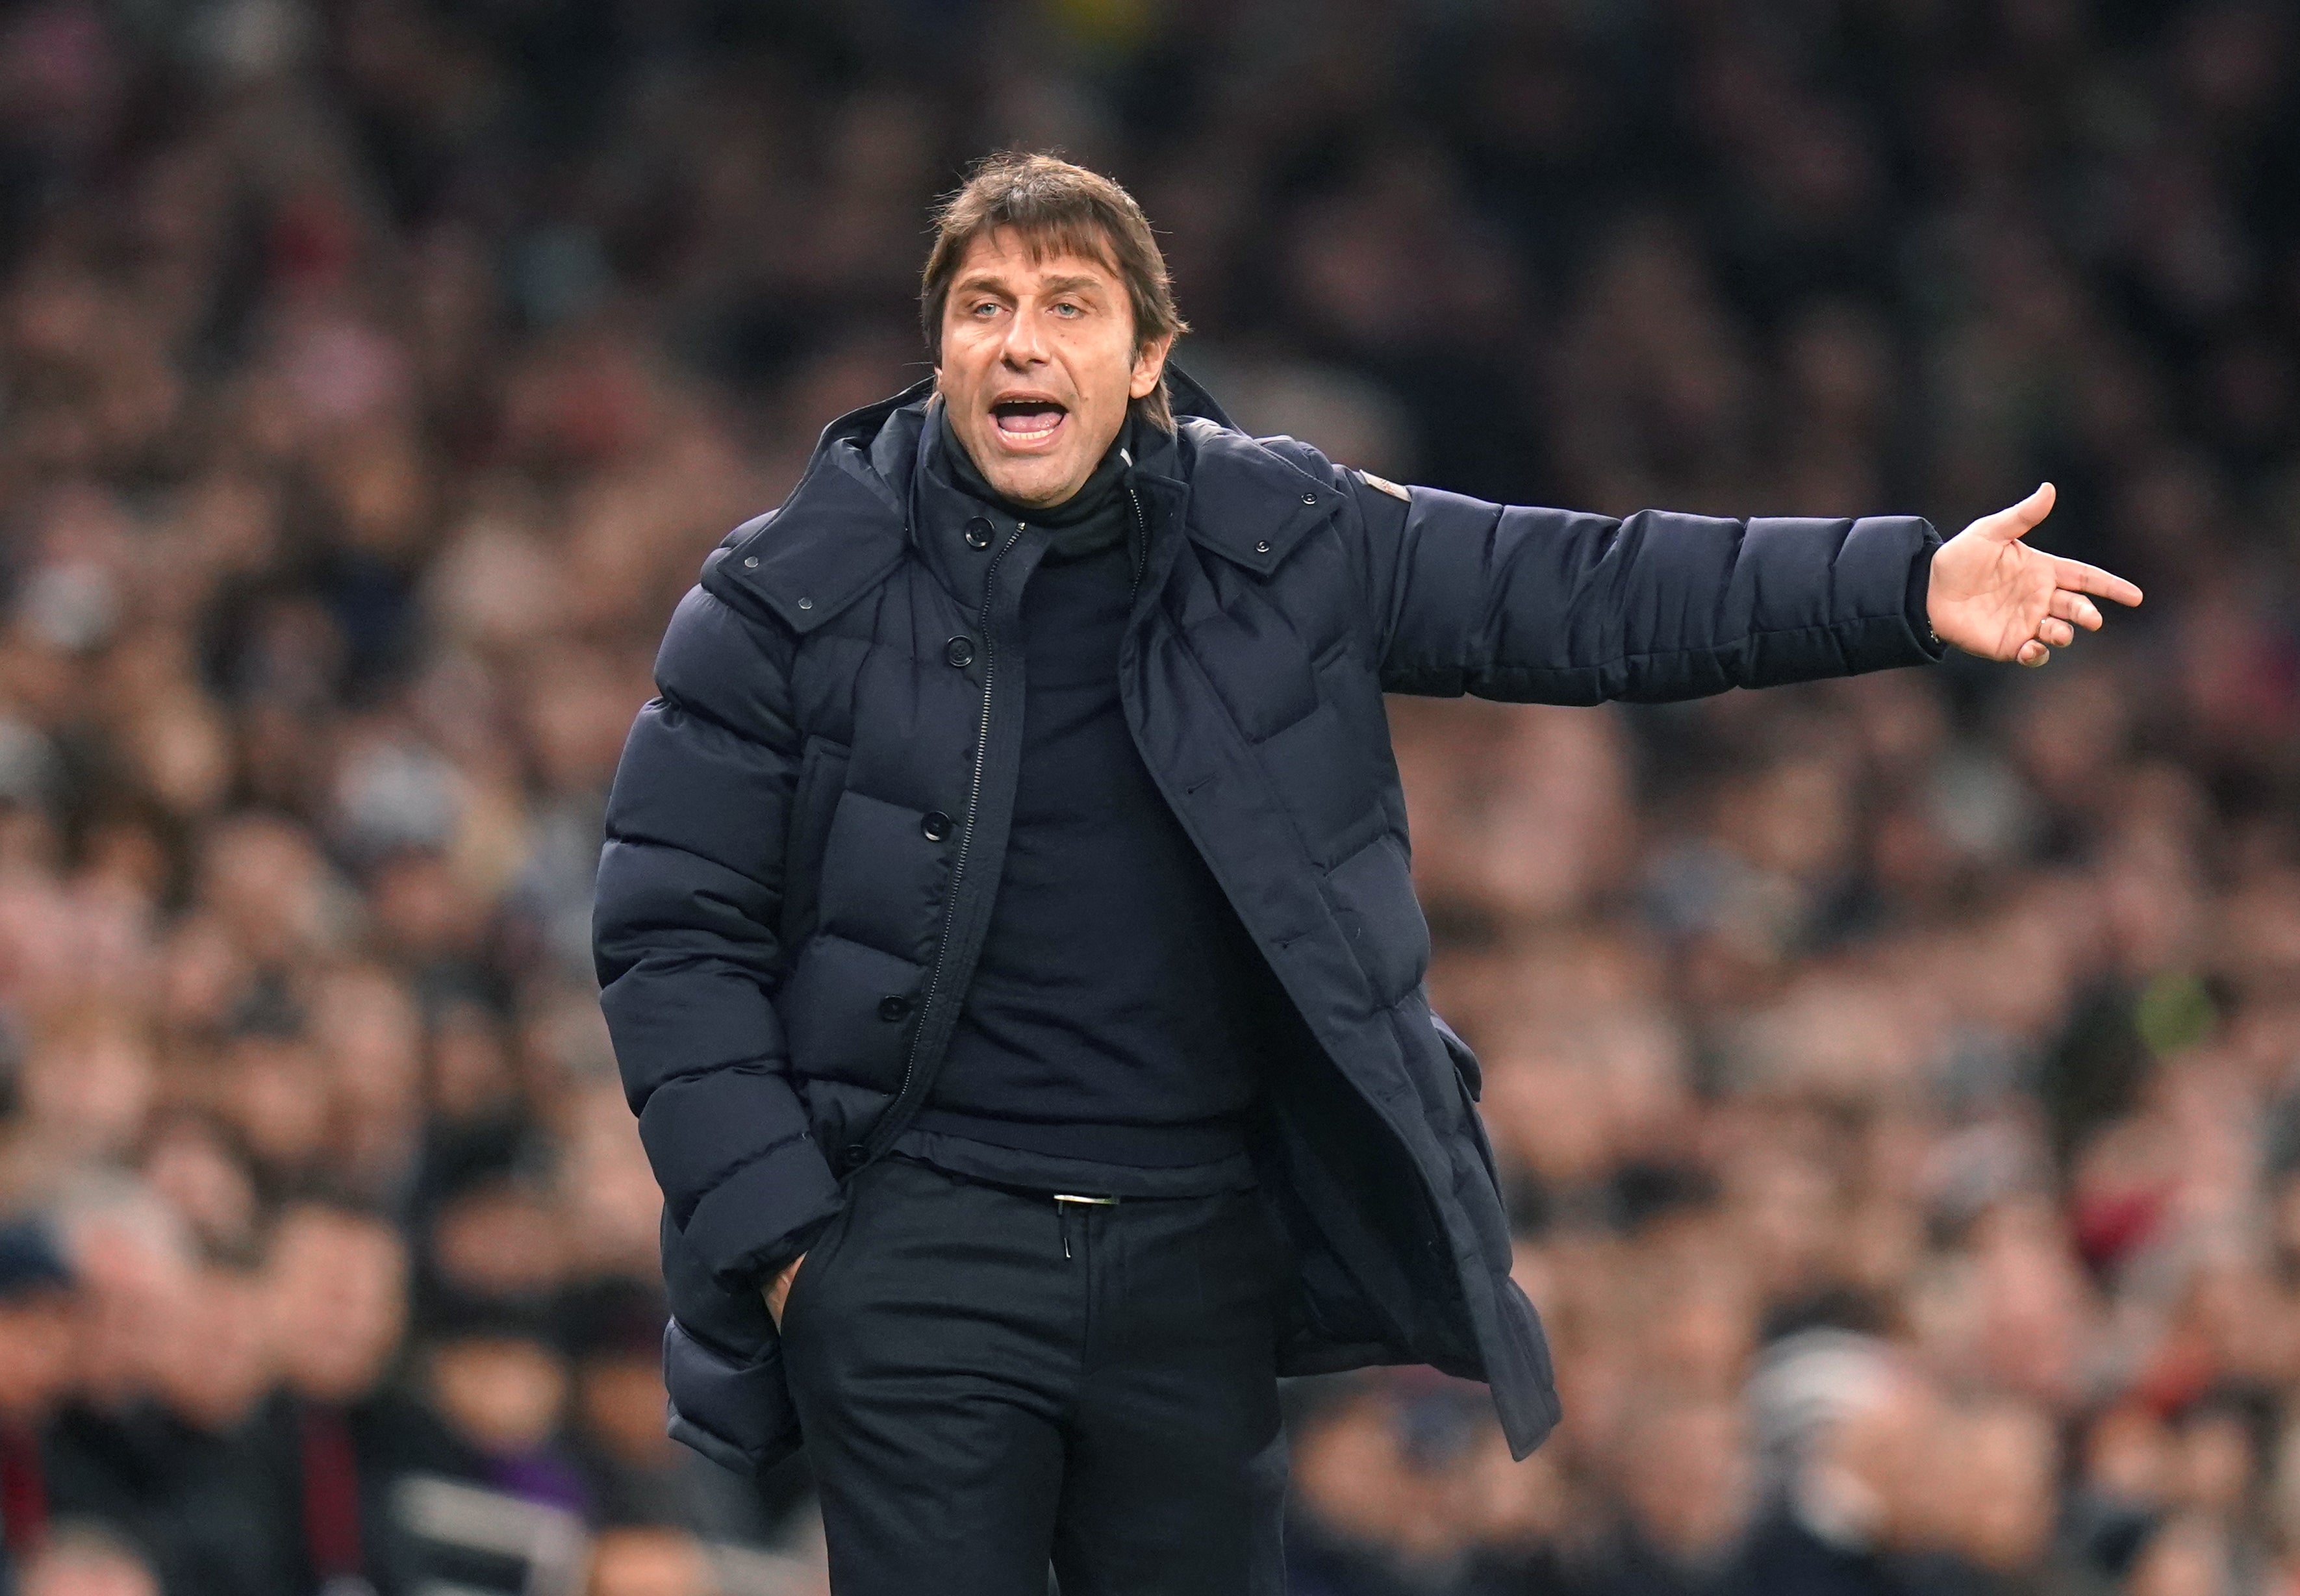 Antonio Conte’s side are looking for a top-four finish this season (Adam davy/PA)